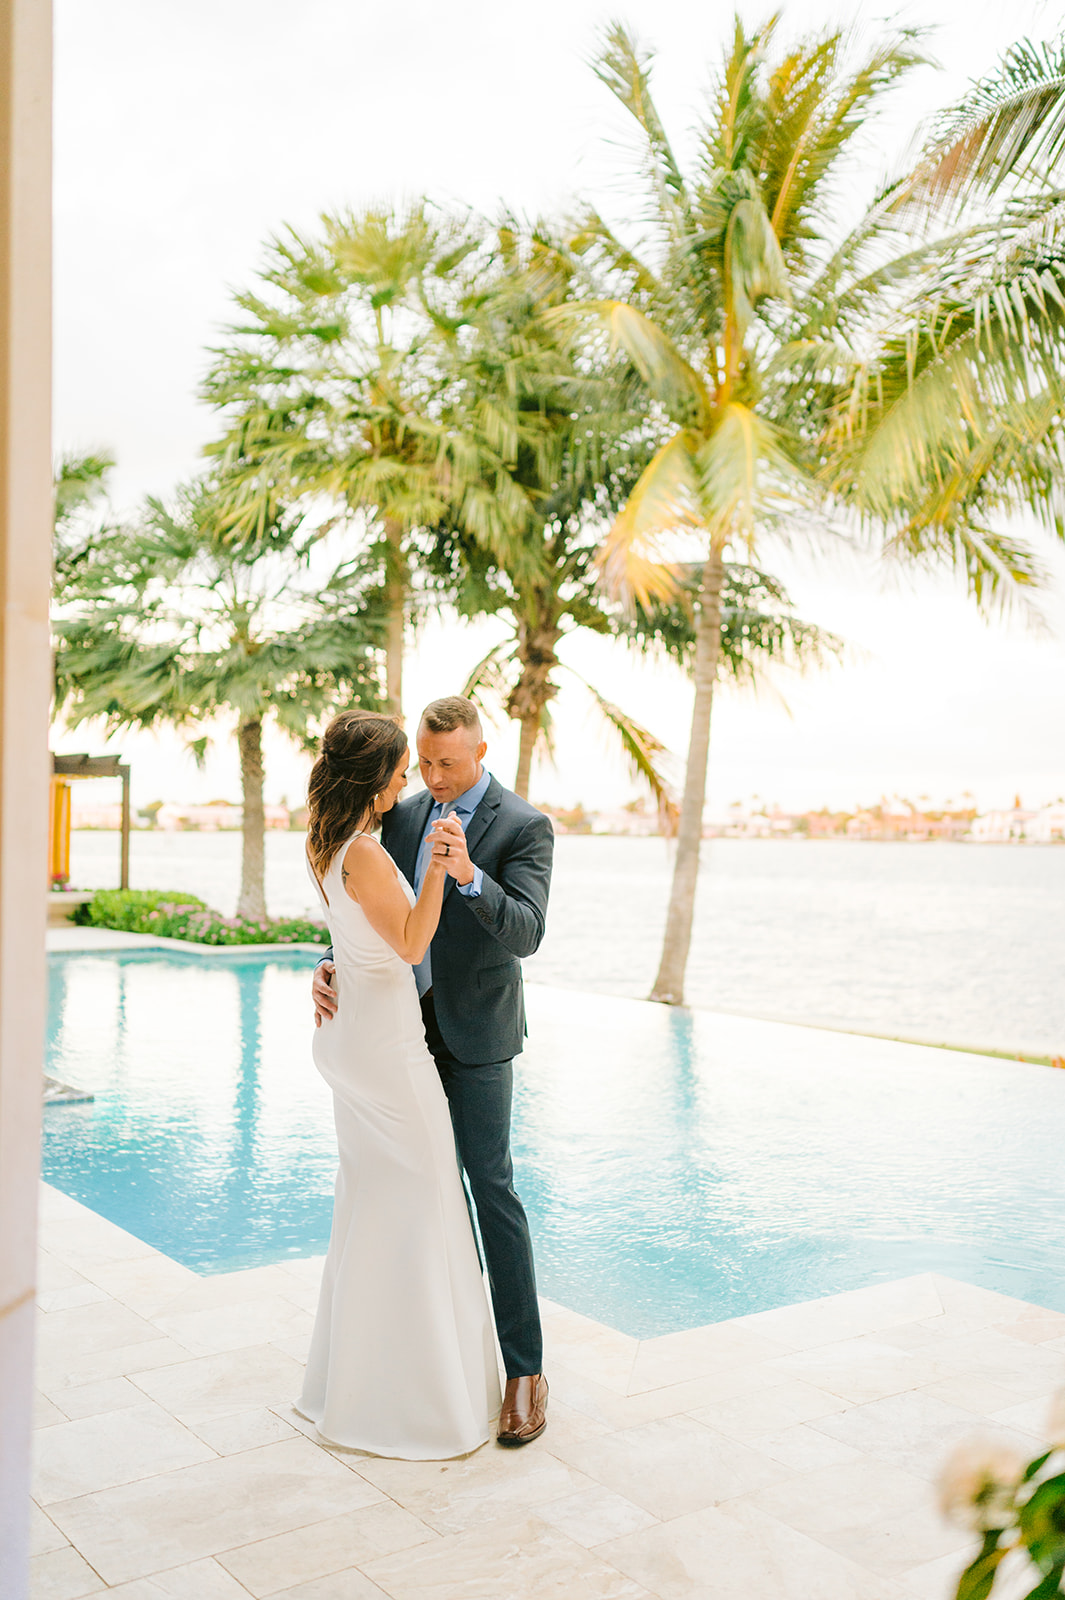 Naples Florida wedding photographer captures the groom's reaction to seeing his bride for the first time
